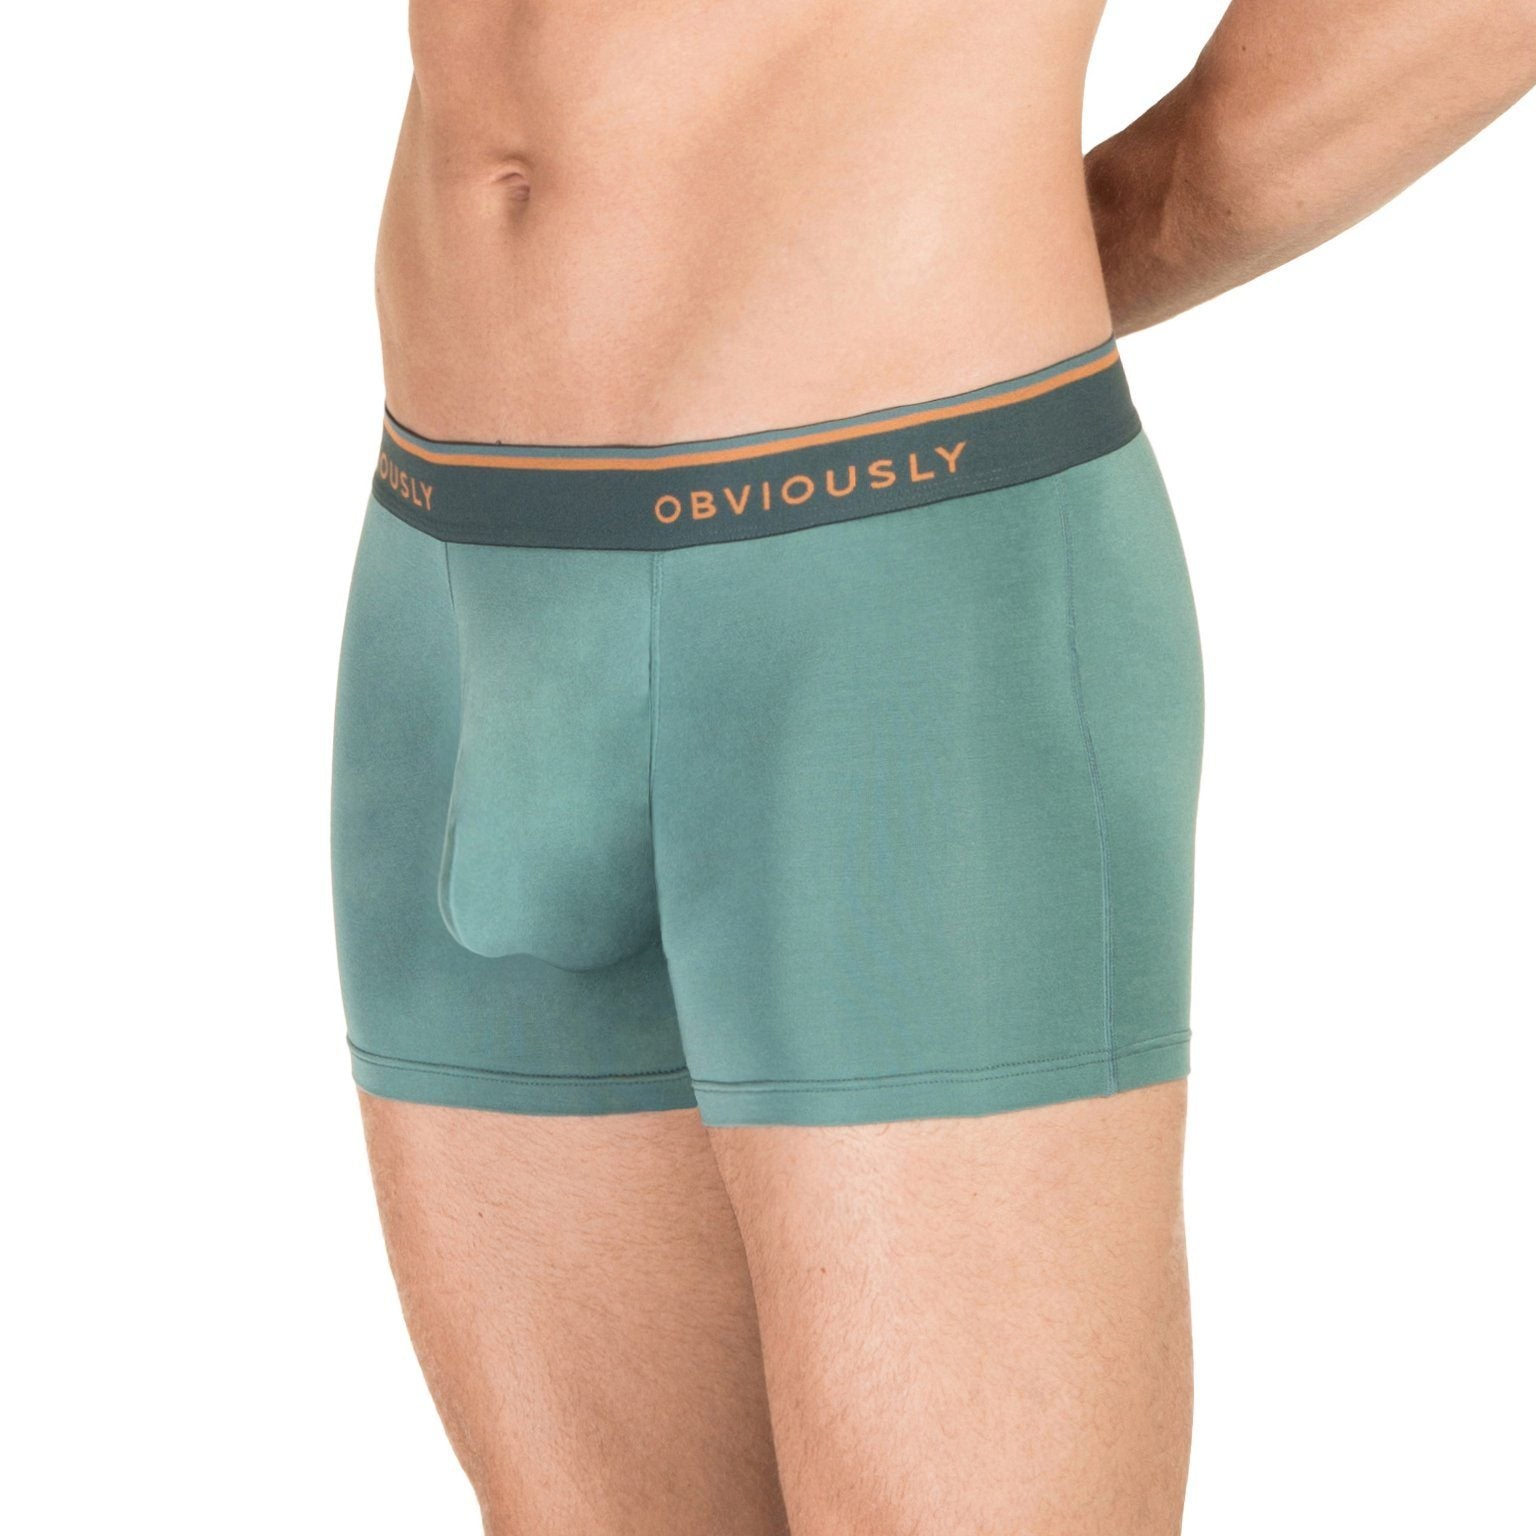 EveryMan - Boxer Brief 3 inch Leg Obviously Apparel Teal Small 